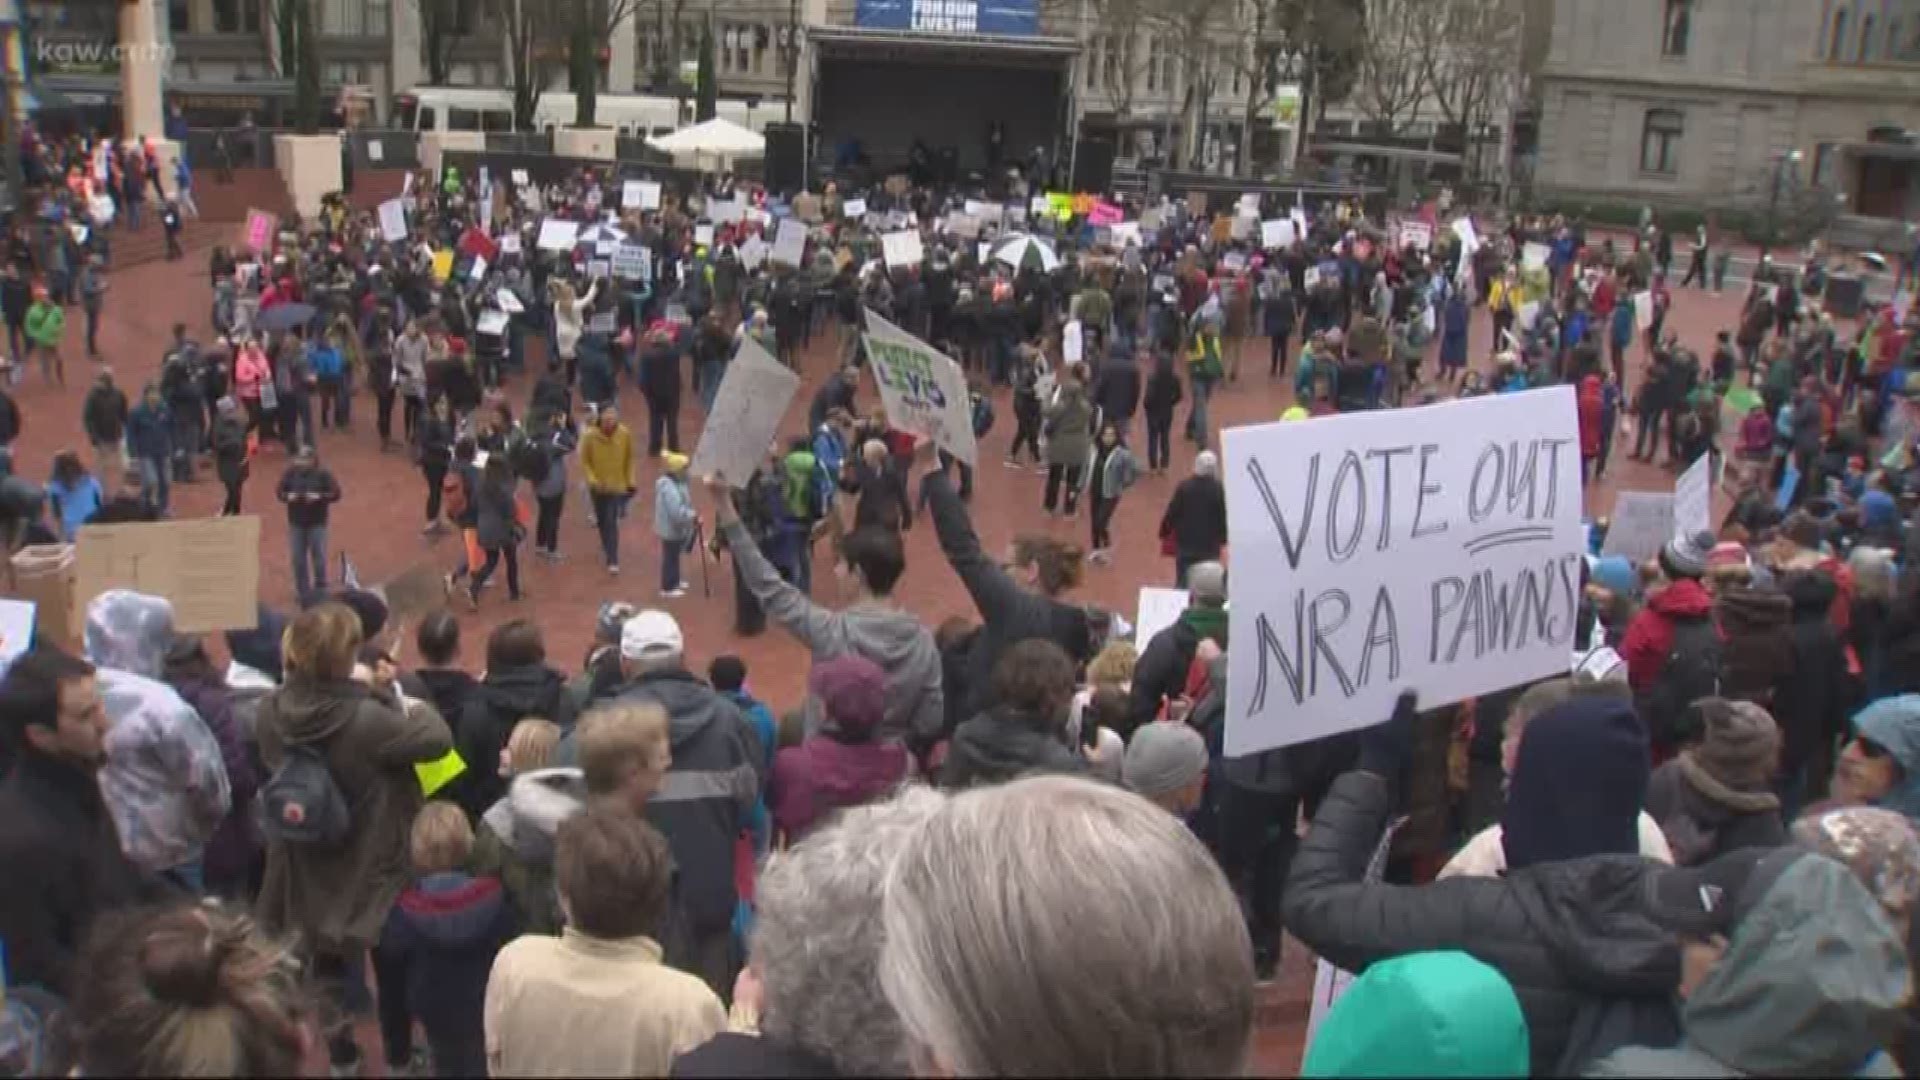 Police estimate about 12,000 people participated in Portland's March for Our Lives